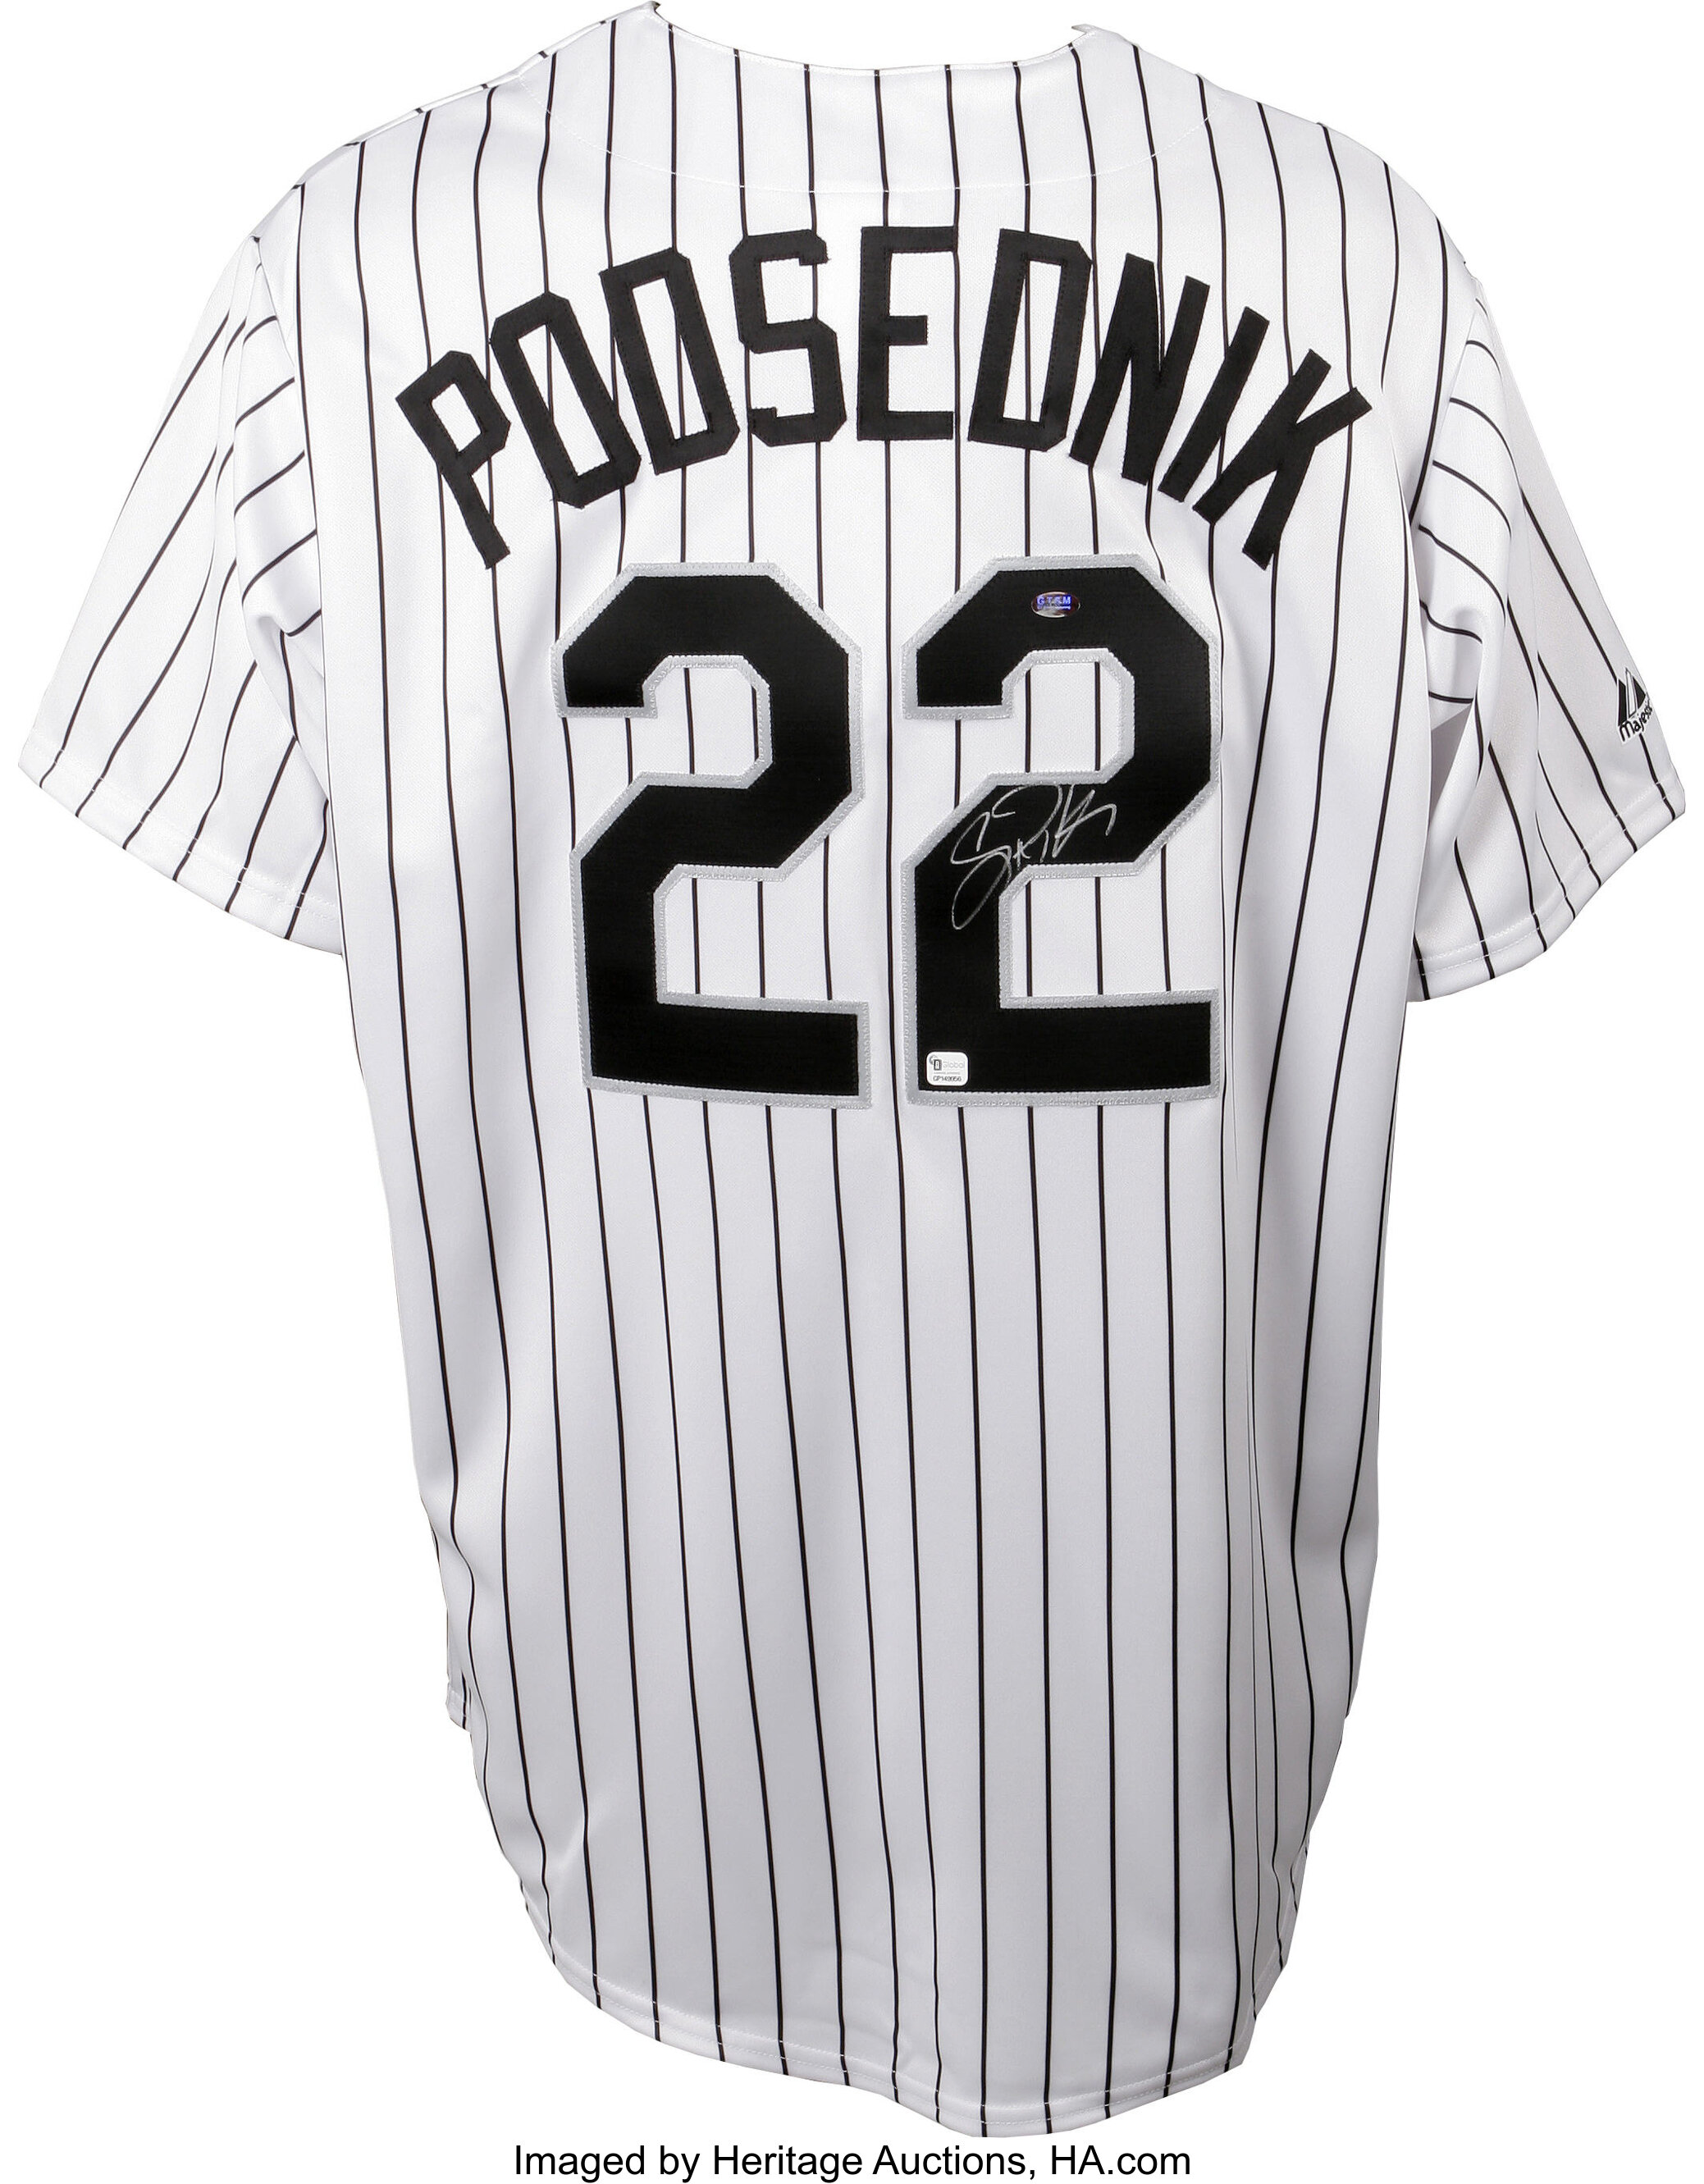 Scott Podsednik Signed Jersey. Another signed jersey from the